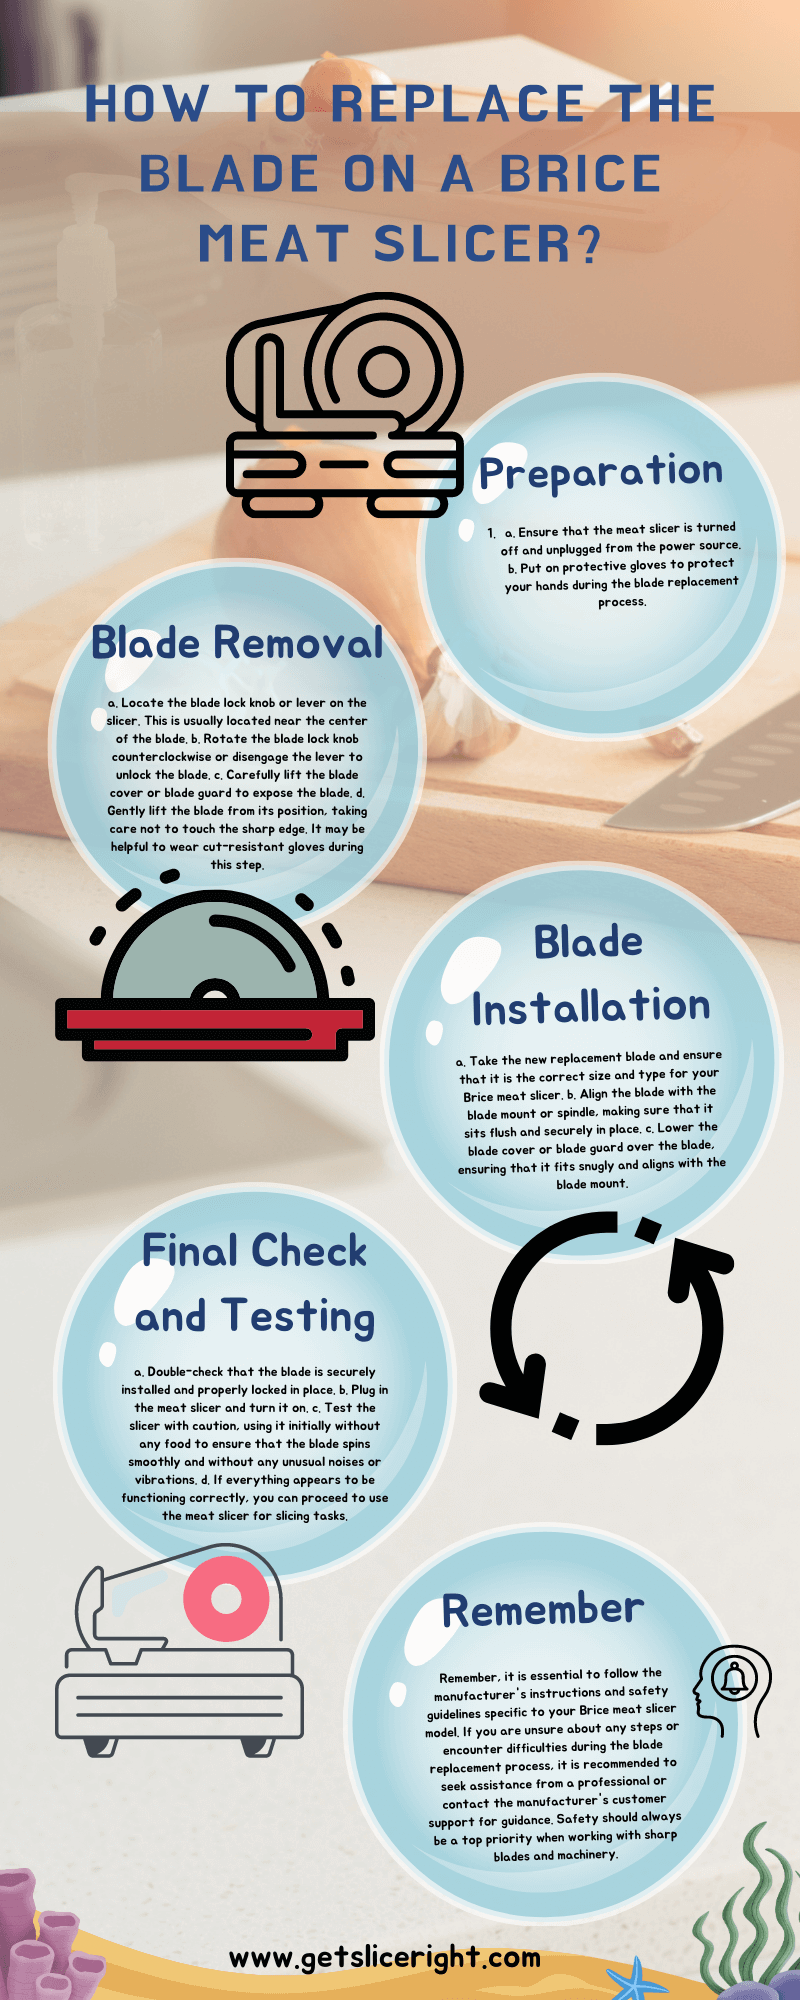 How To Replace The Blade On A Brice Meat Slicer - Infographics